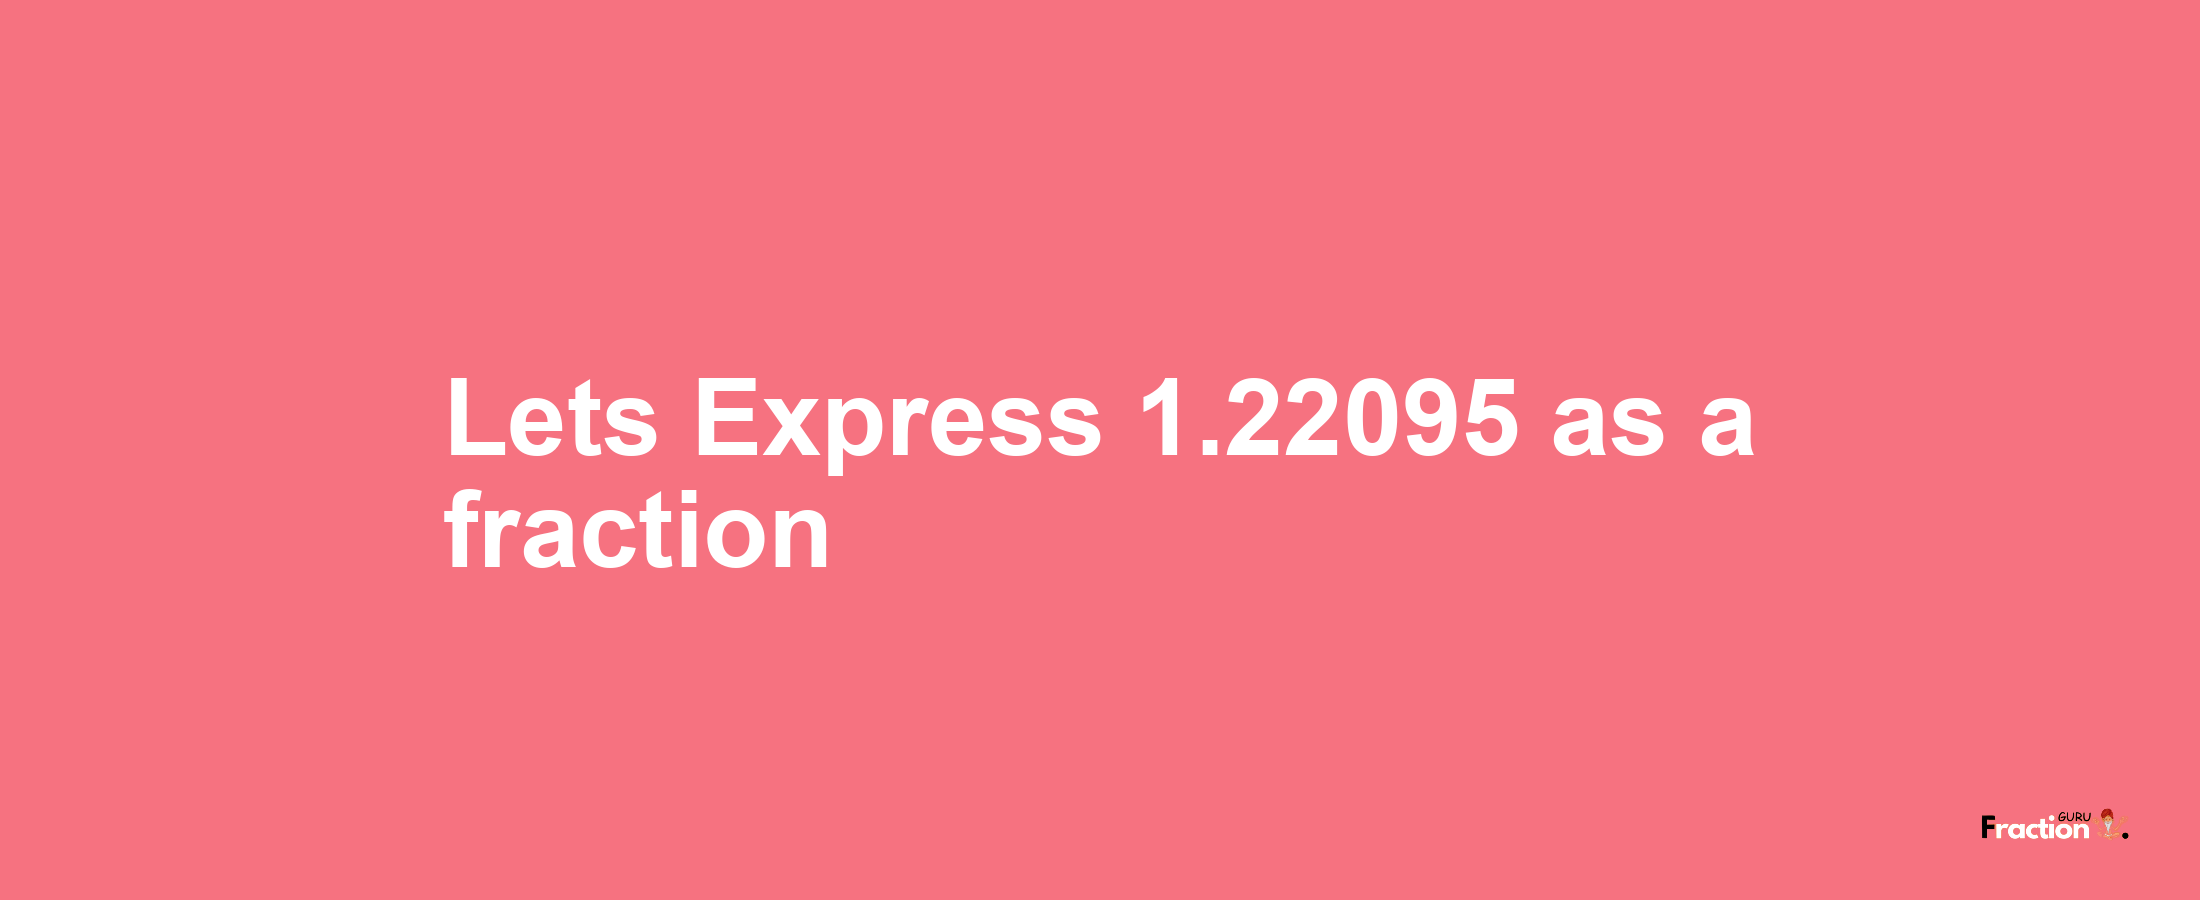 Lets Express 1.22095 as afraction